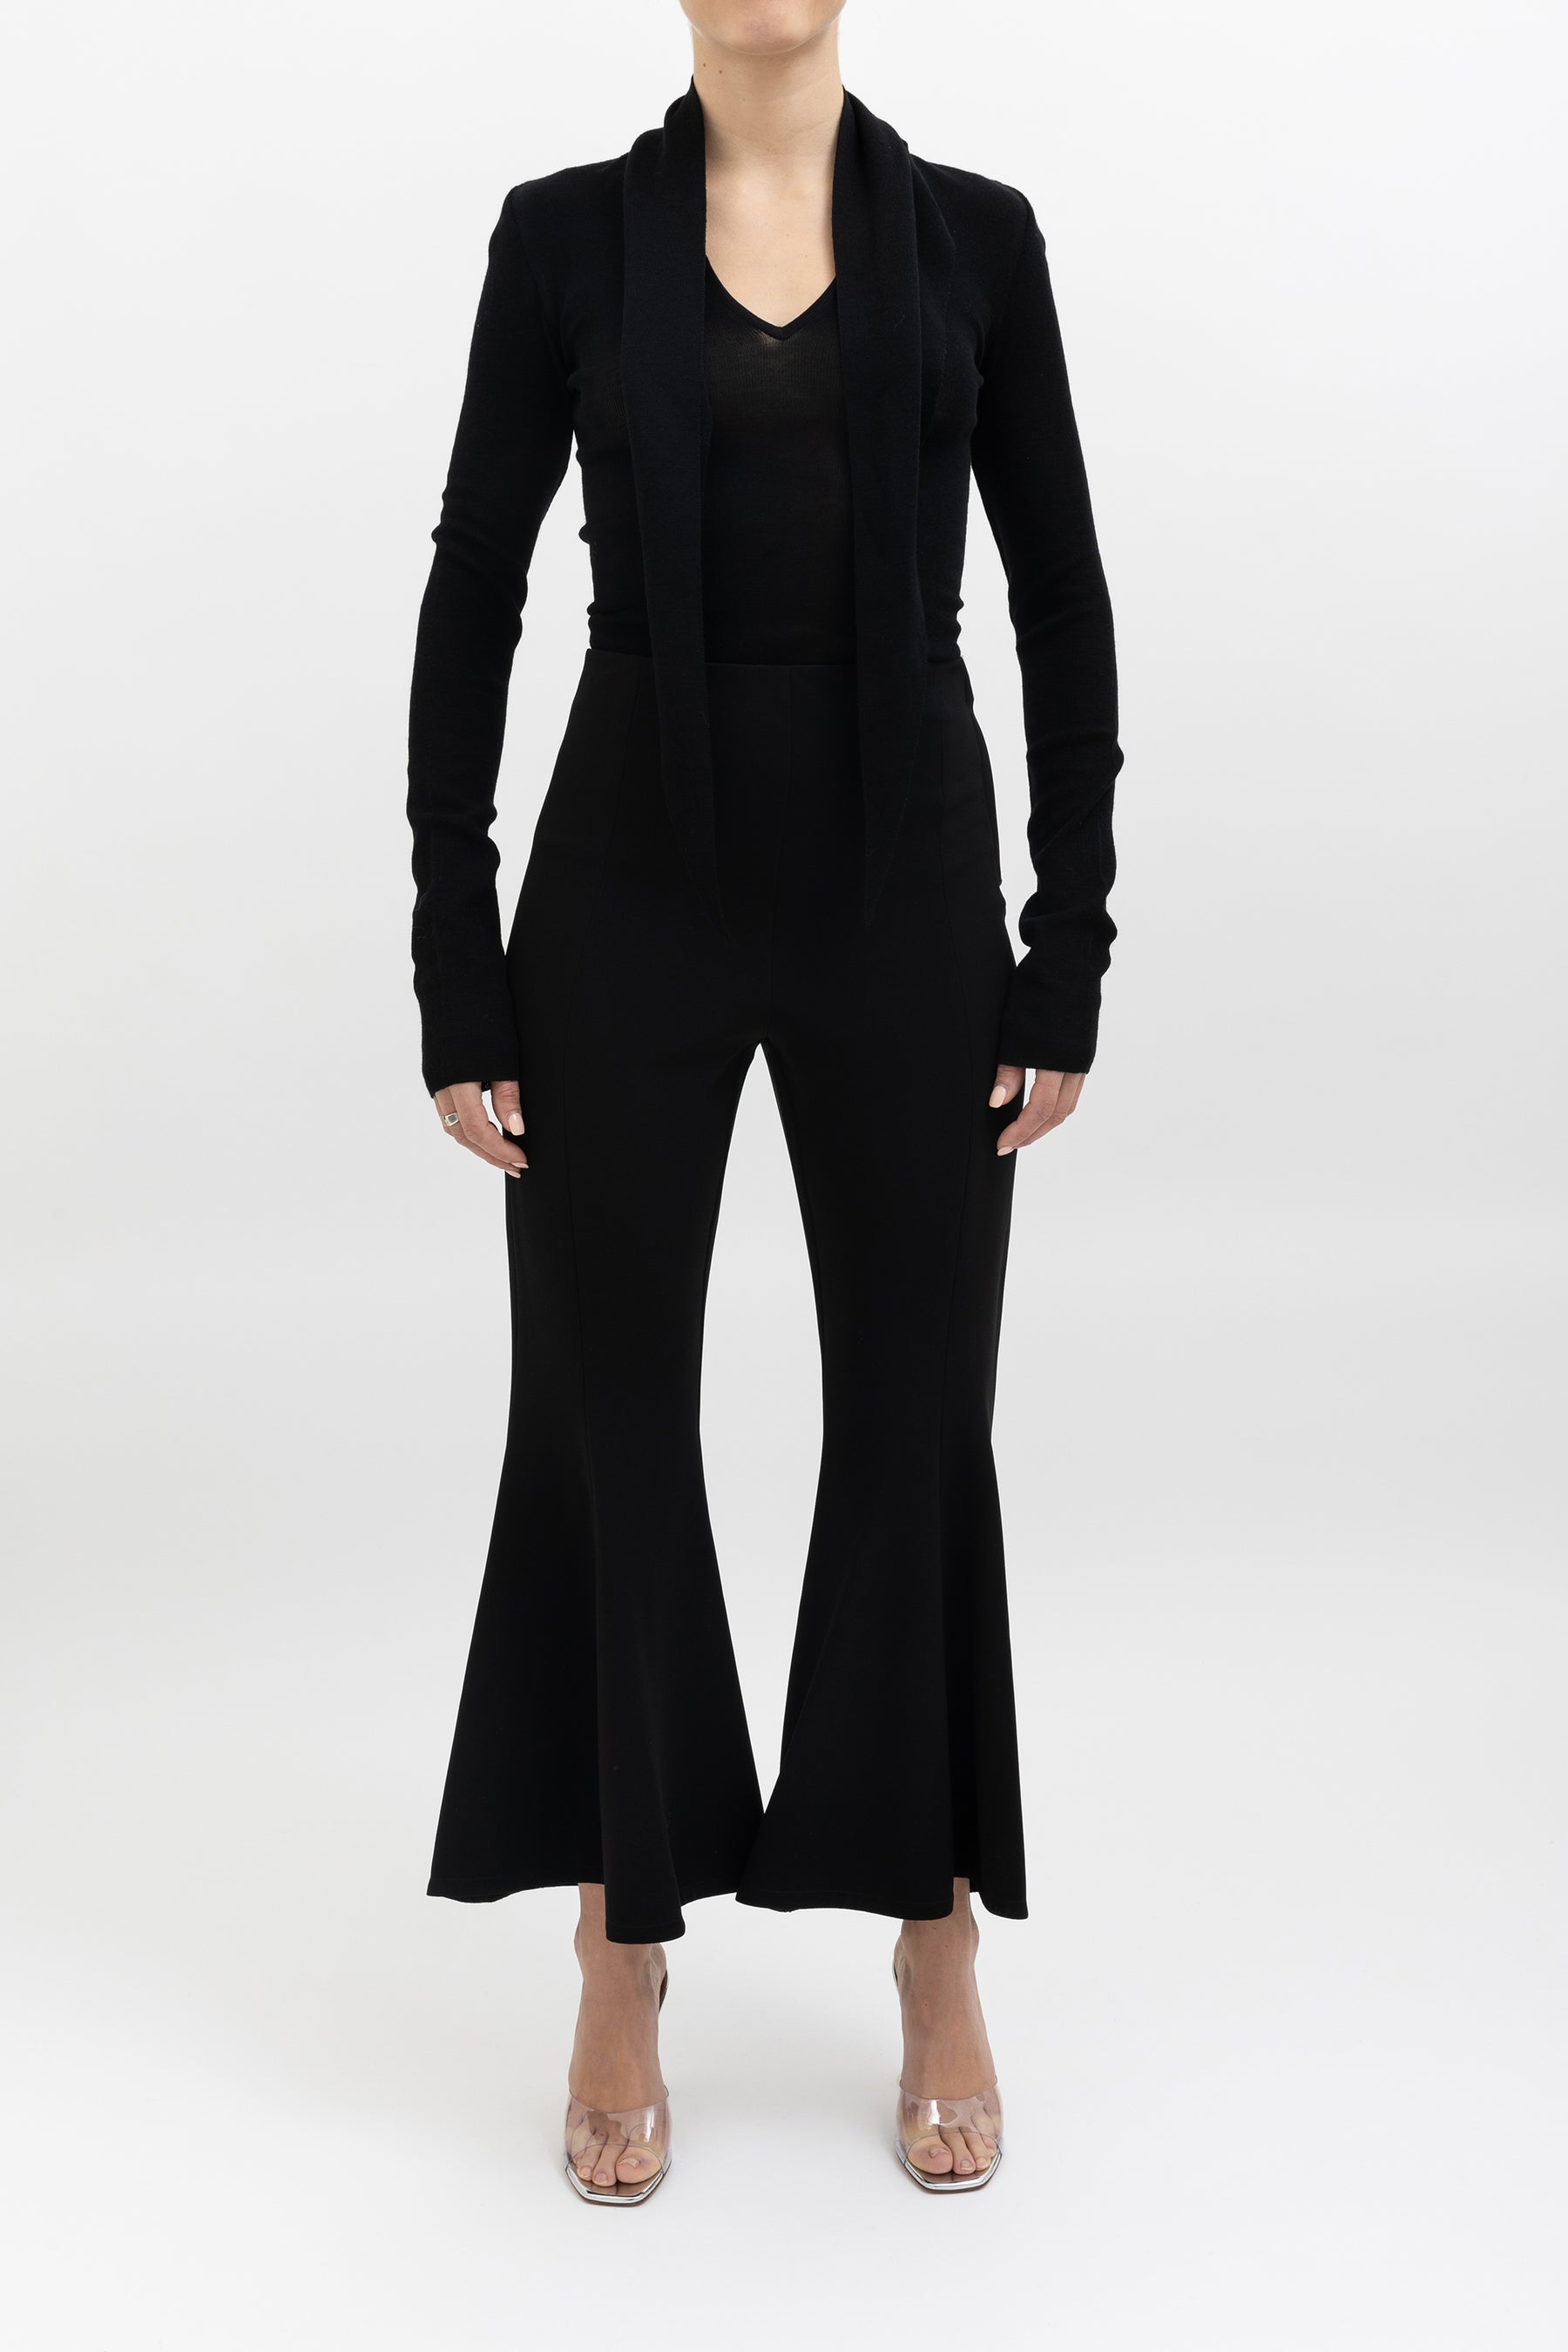 Cropped Flare Pant